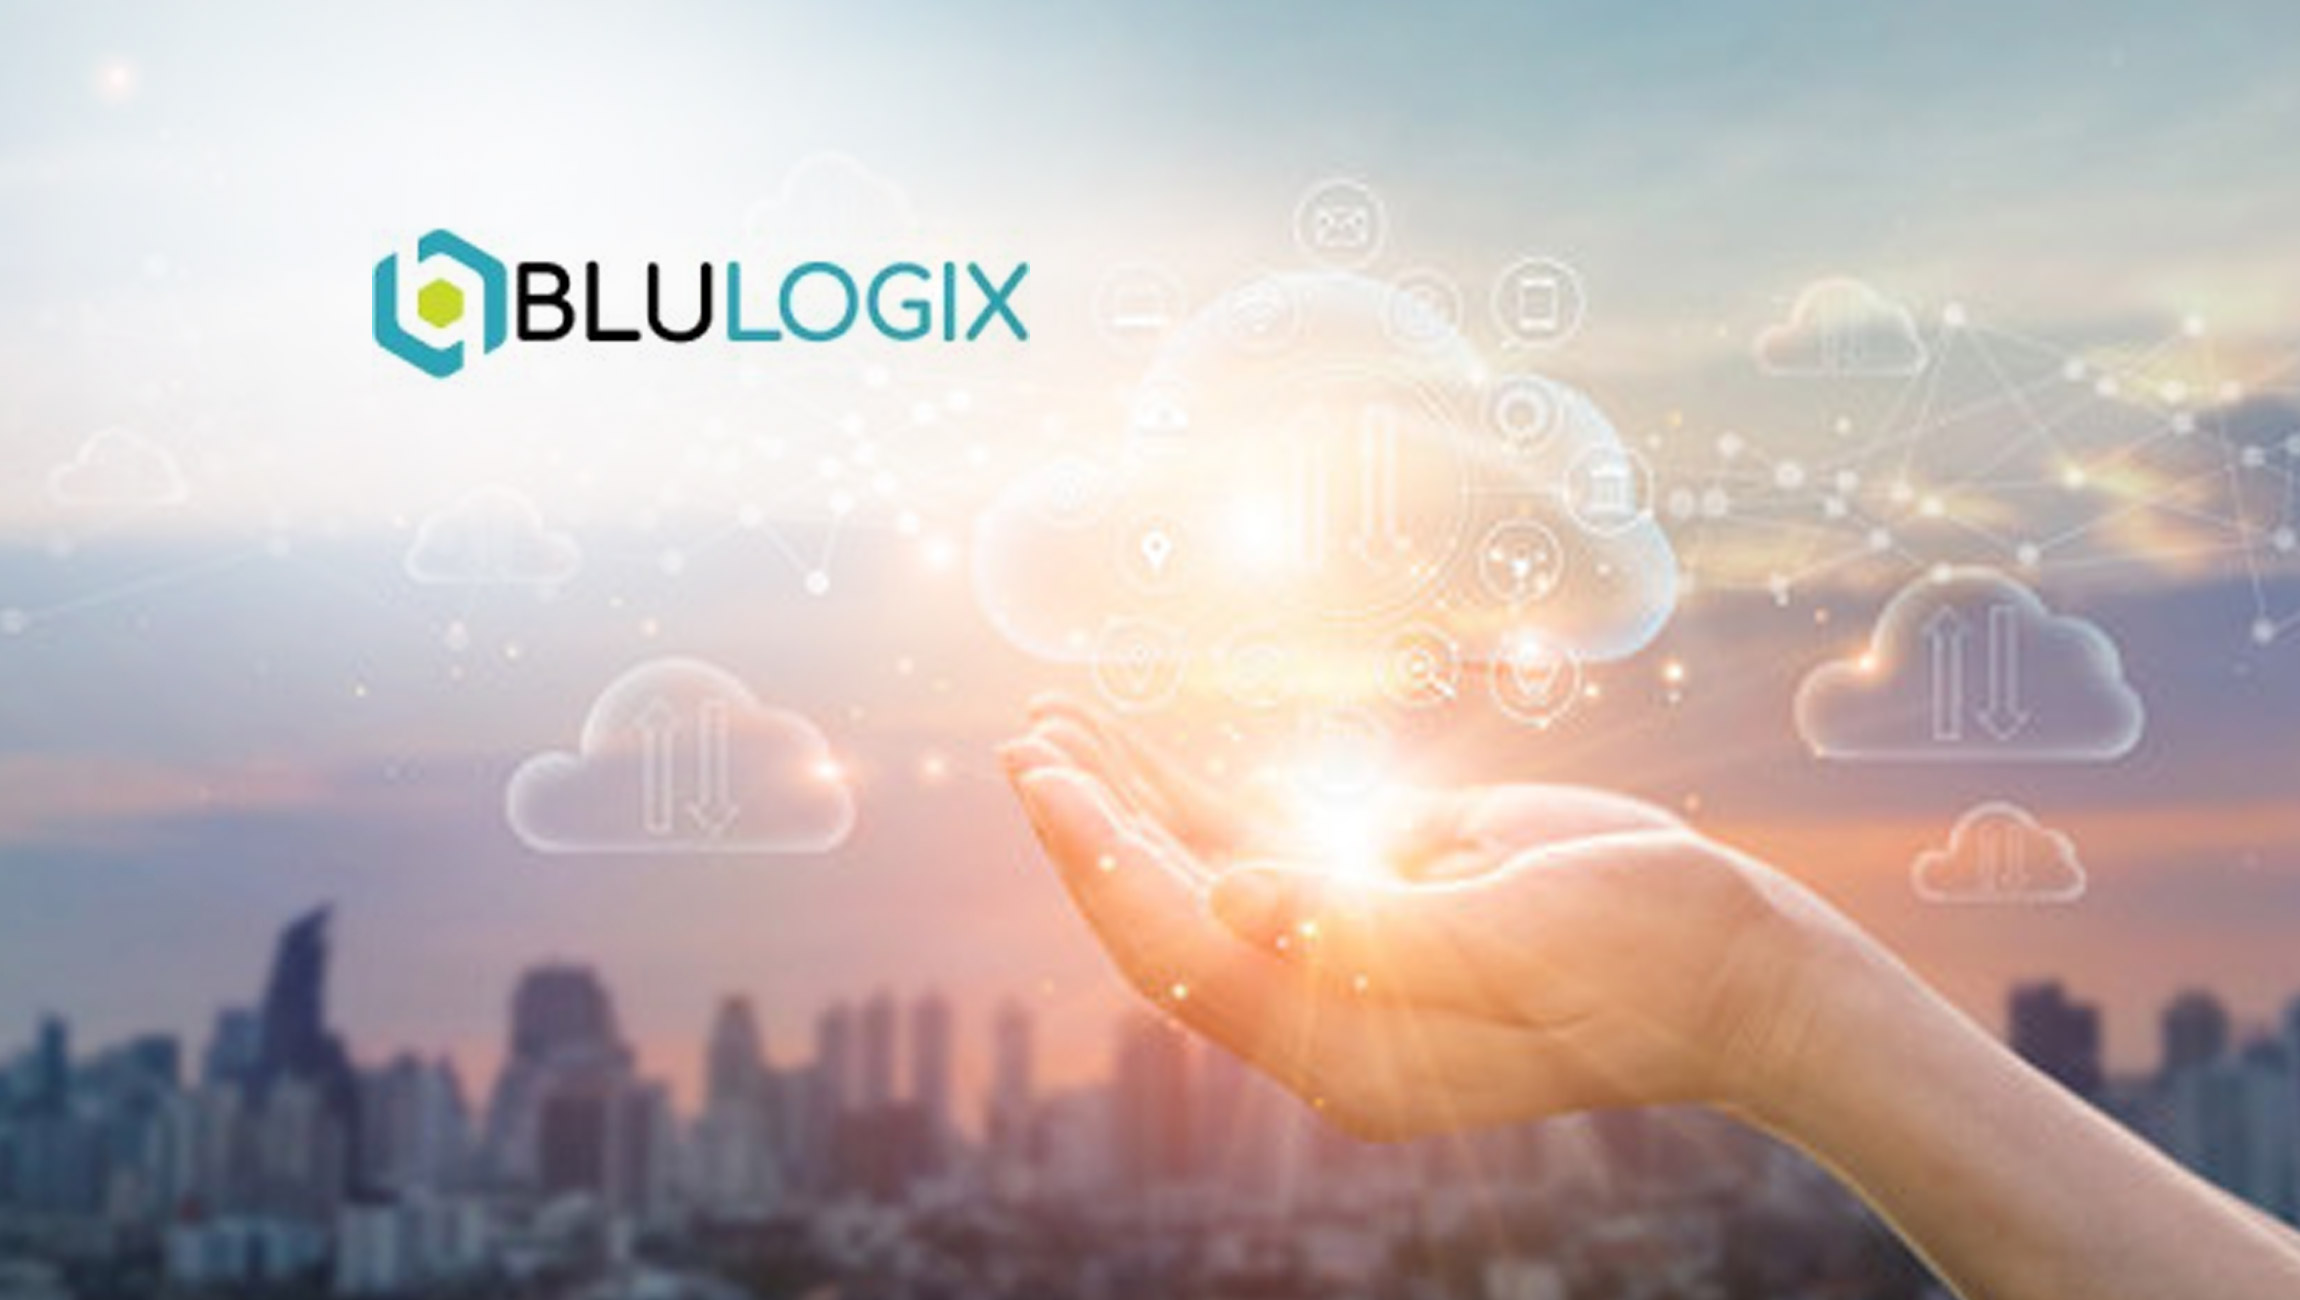 BluLogix Launches BluIQ Cloud Development Platform All-in-One Development Framework to Help Companies Quickly & Cost-Effectively Personalize their Subscription Billing